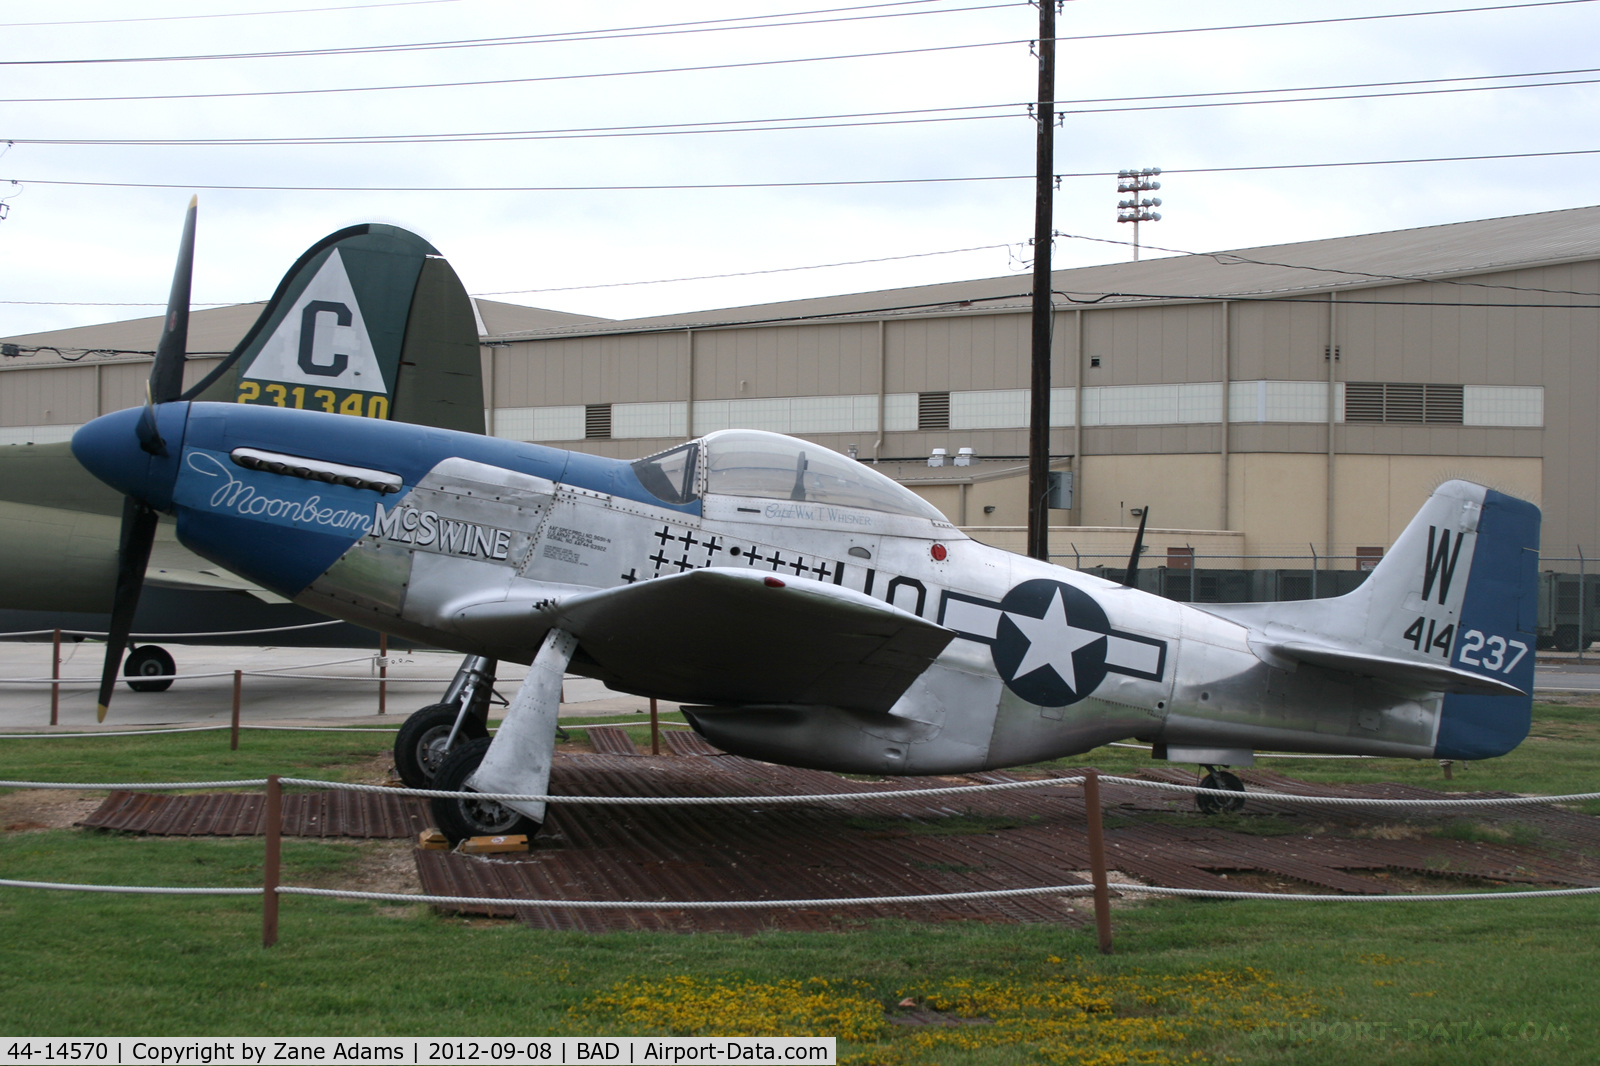 44-14570, 2010 North American P-51D Mustang C/N 122-40196, At Barksdale Air Force Base - 8th Air Force Museum